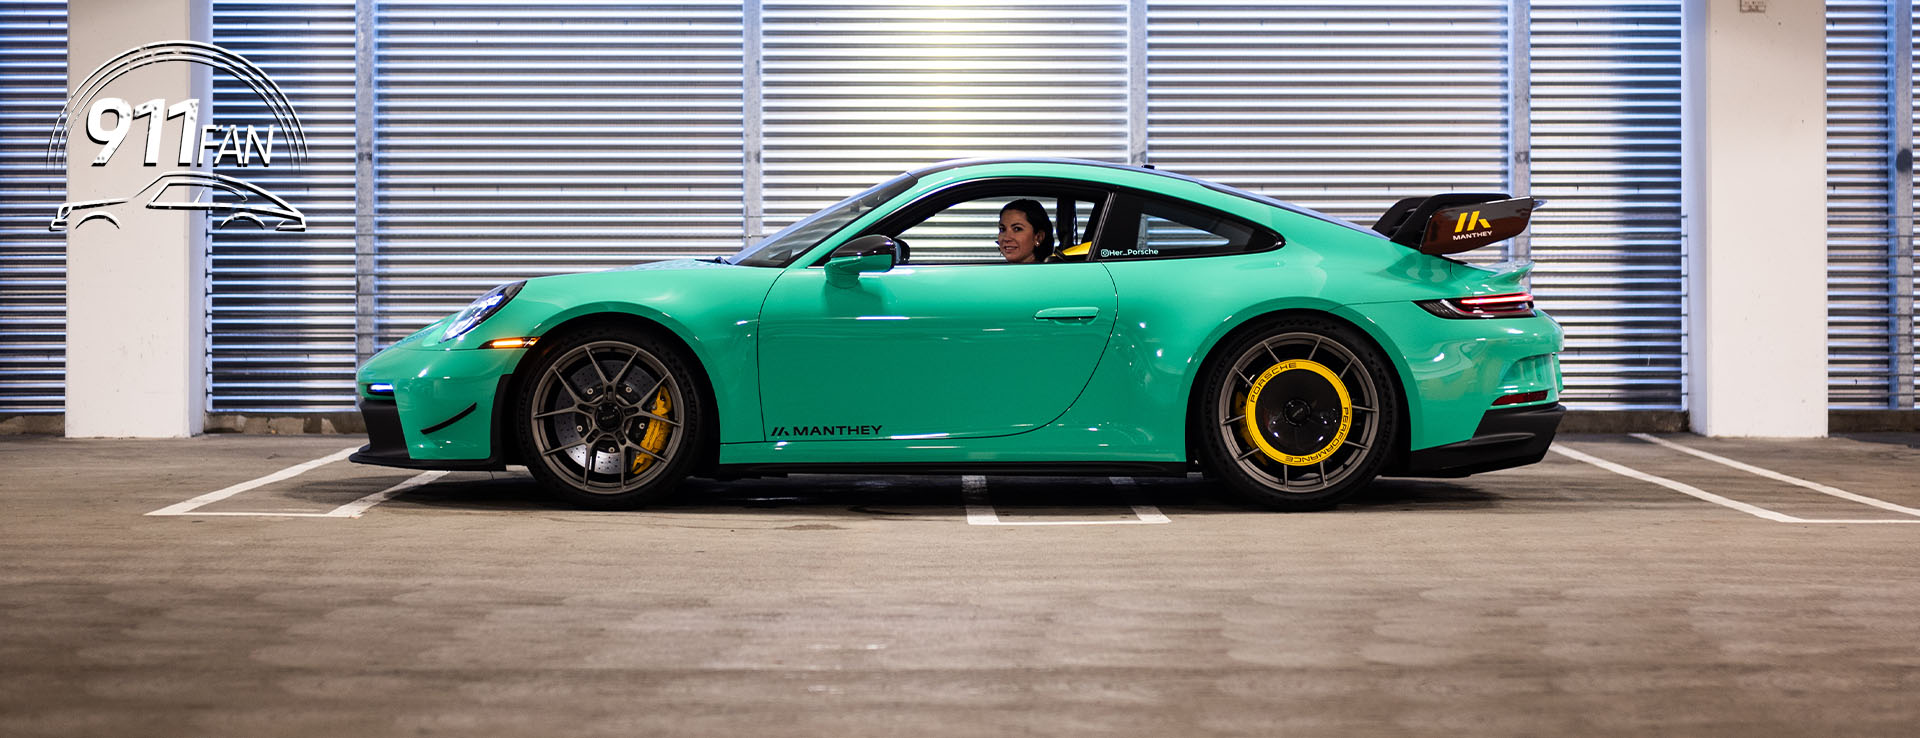 Jade Green Porsche 911 GT3 with Manthey Kit in profile